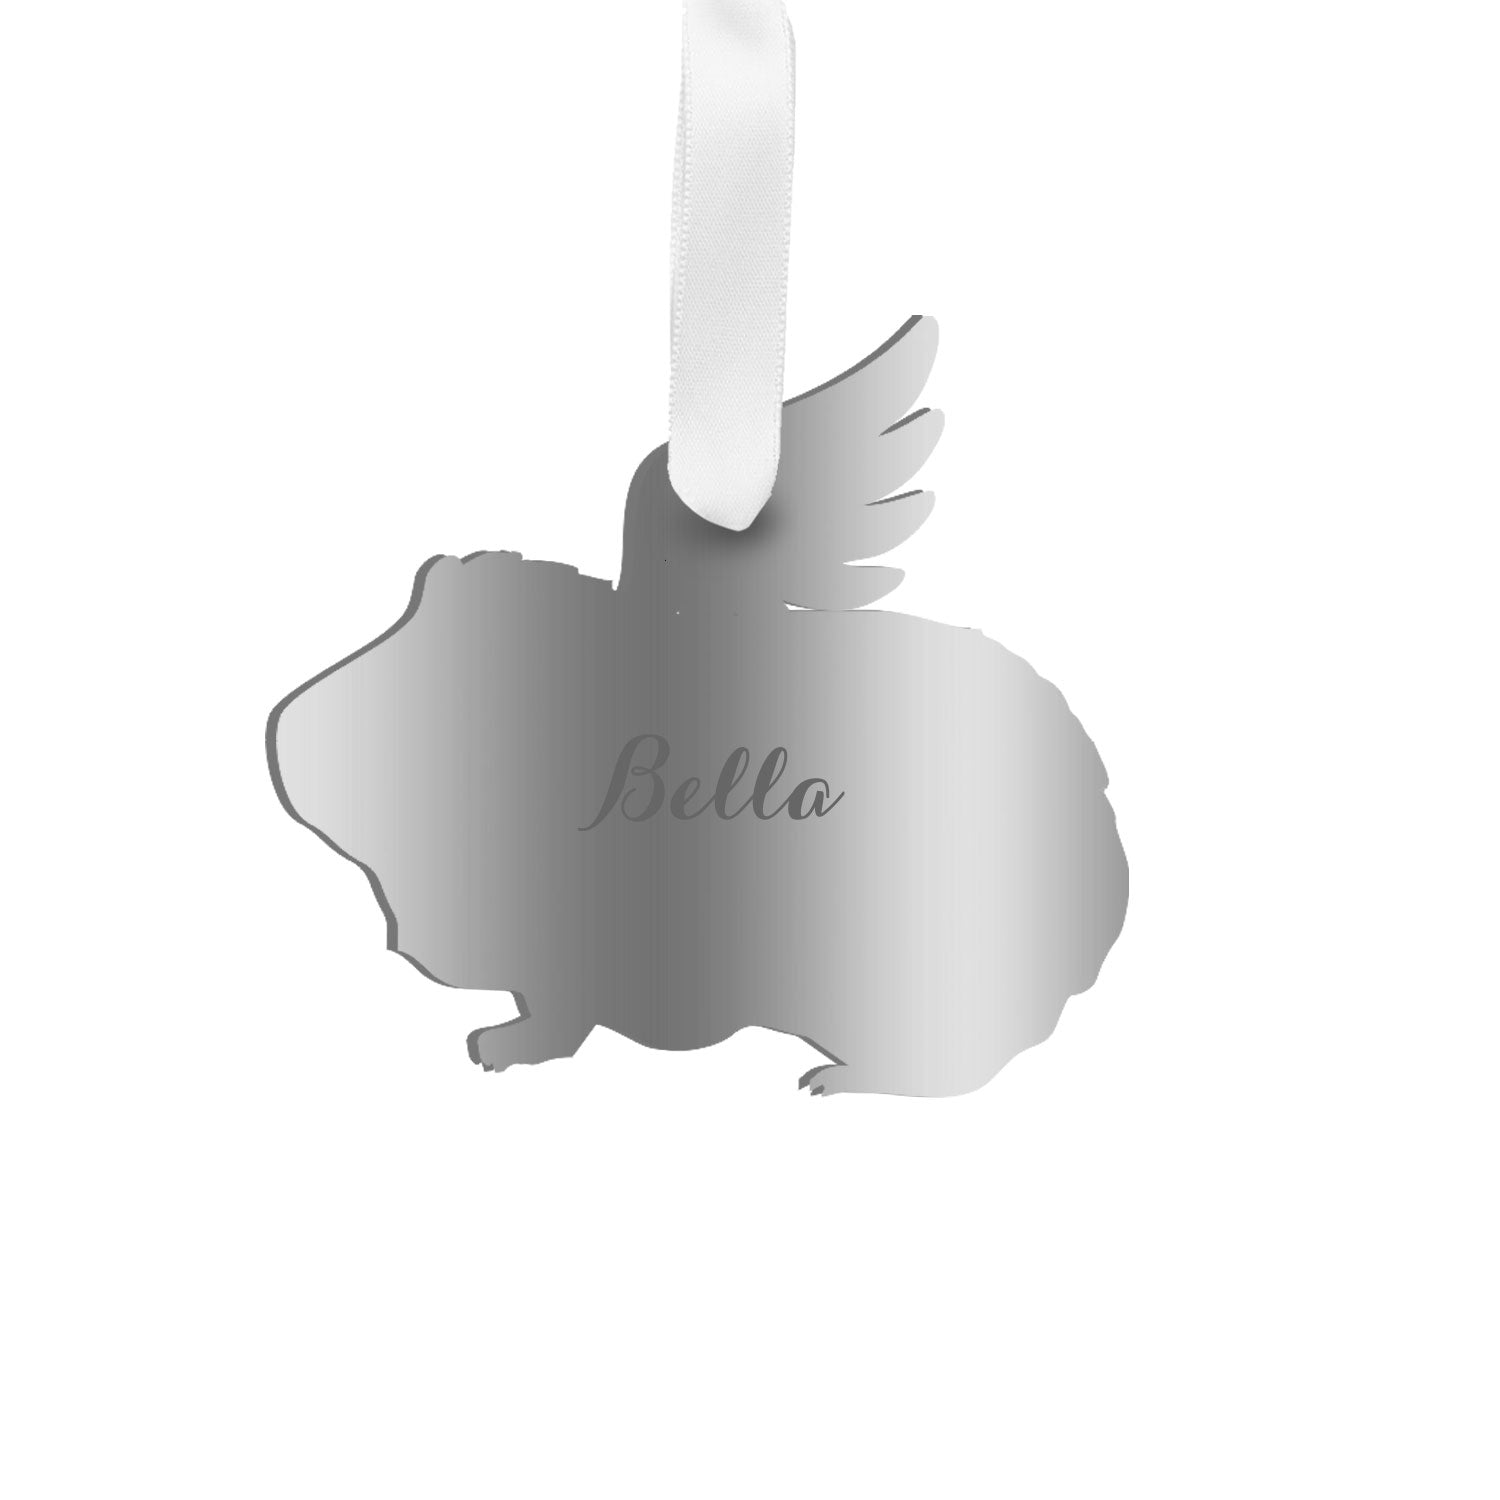 Moon and Lola - Personalized Angel Guinea Pig Ornament with wings in silver